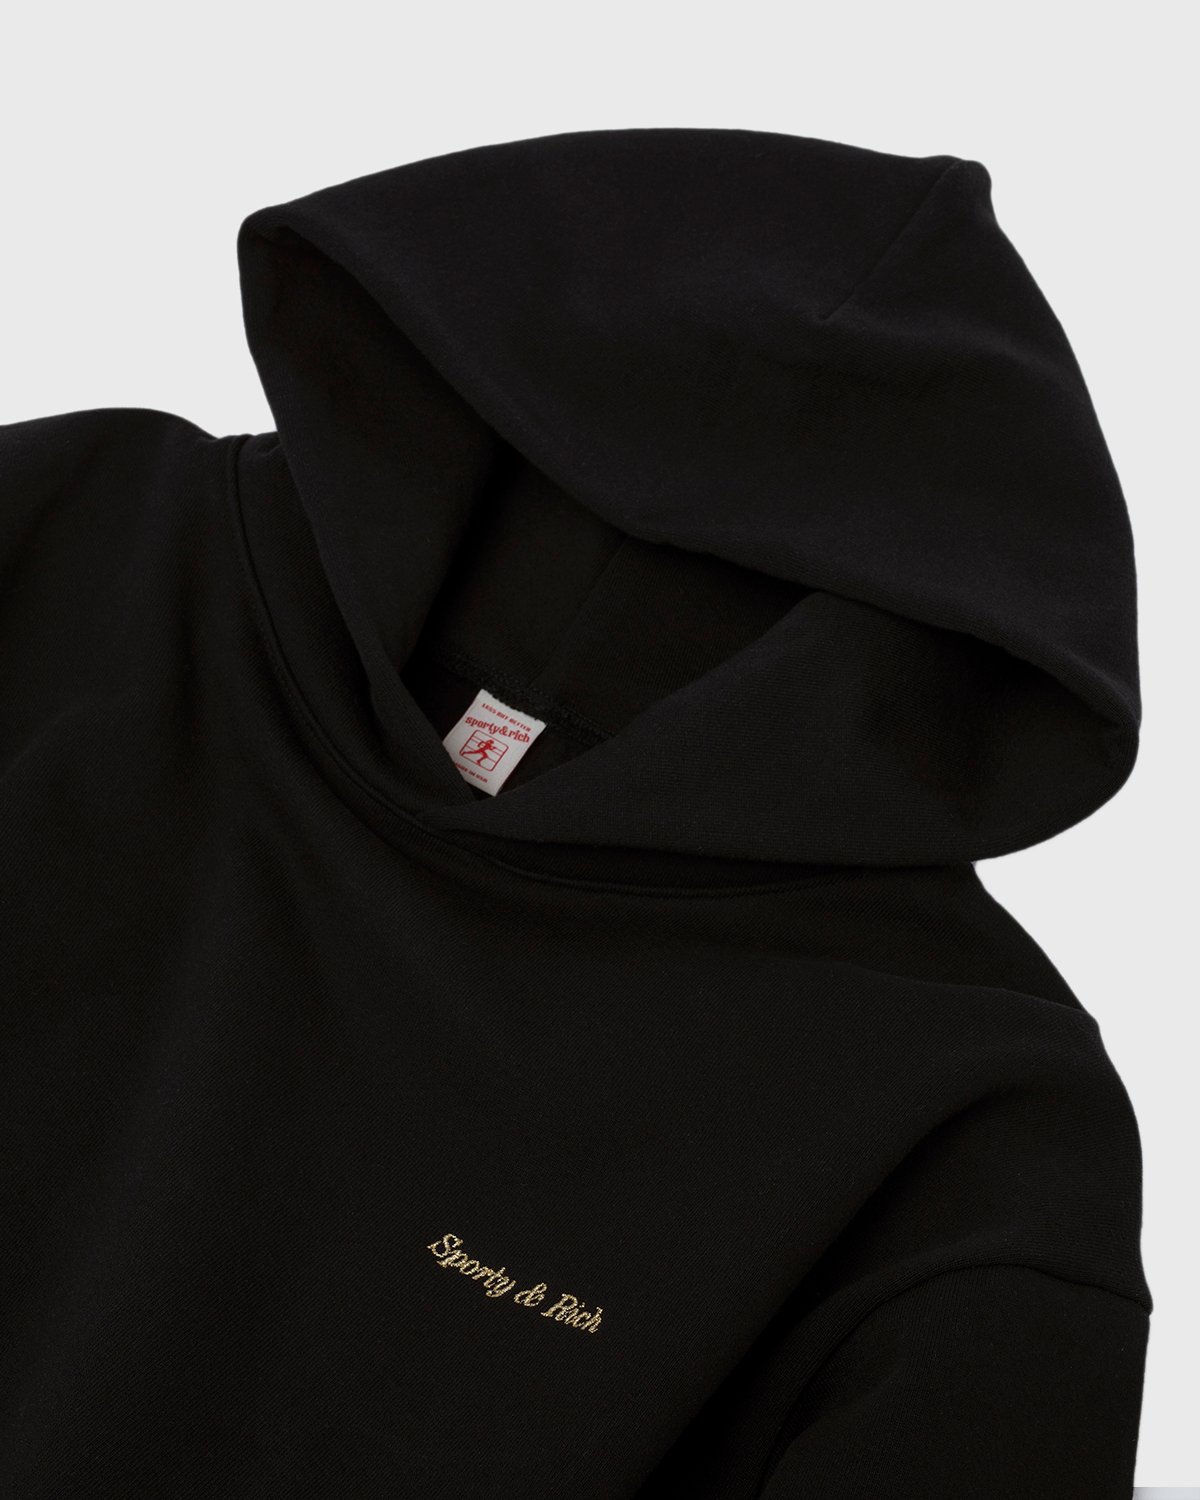 Sporty and Rich - Classic Logo Hoodie Black - Clothing - Black - Image 3